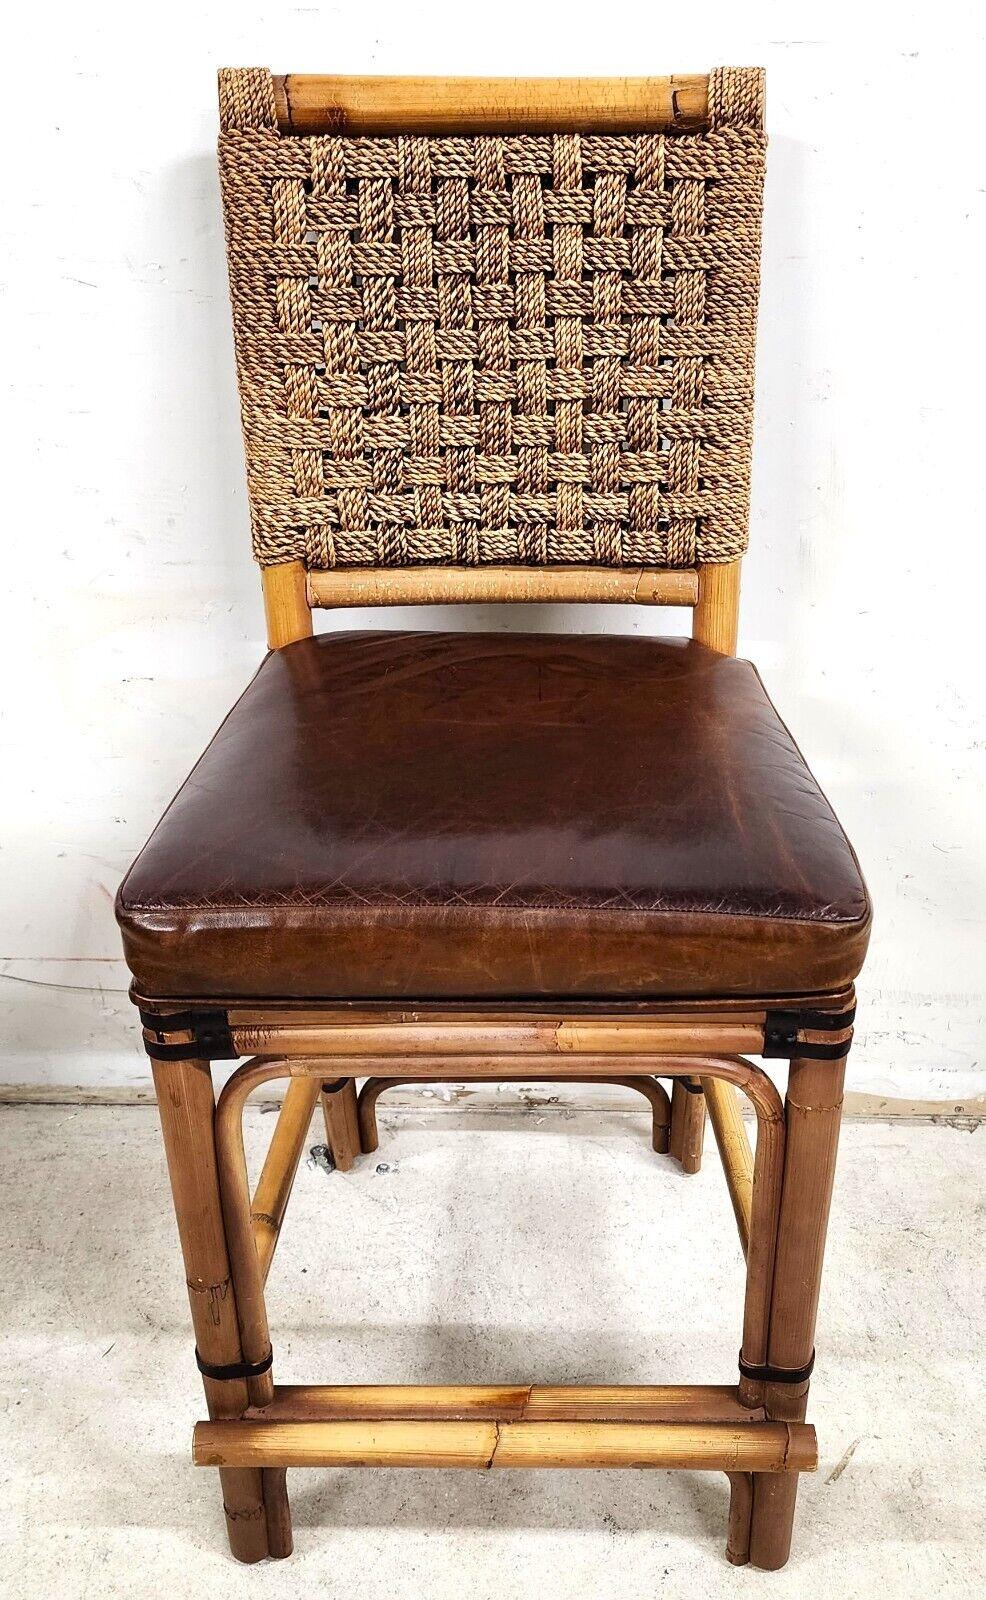 For FULL item description click on CONTINUE READING at the bottom of this page.

Offering One Of Our Recent Palm Beach Estate Fine Furniture Acquisitions Of A
Bamboo and Leather Counter Stool with Rattan & Braided Rope by PALECEK

Approximate